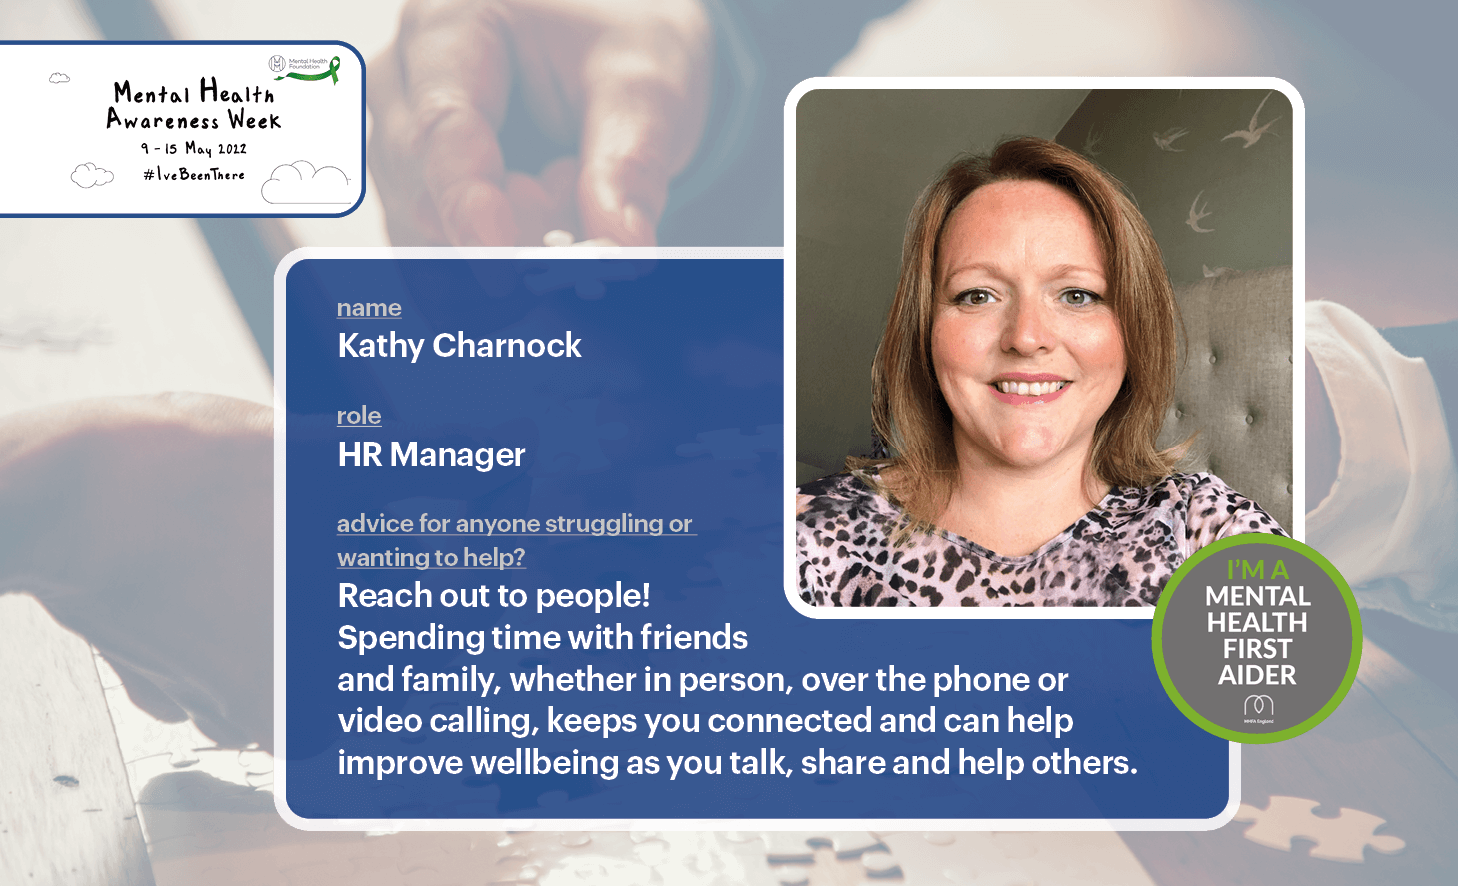 Advice from our Mental Health First Aiders - Kathy Charnock, HR Manager